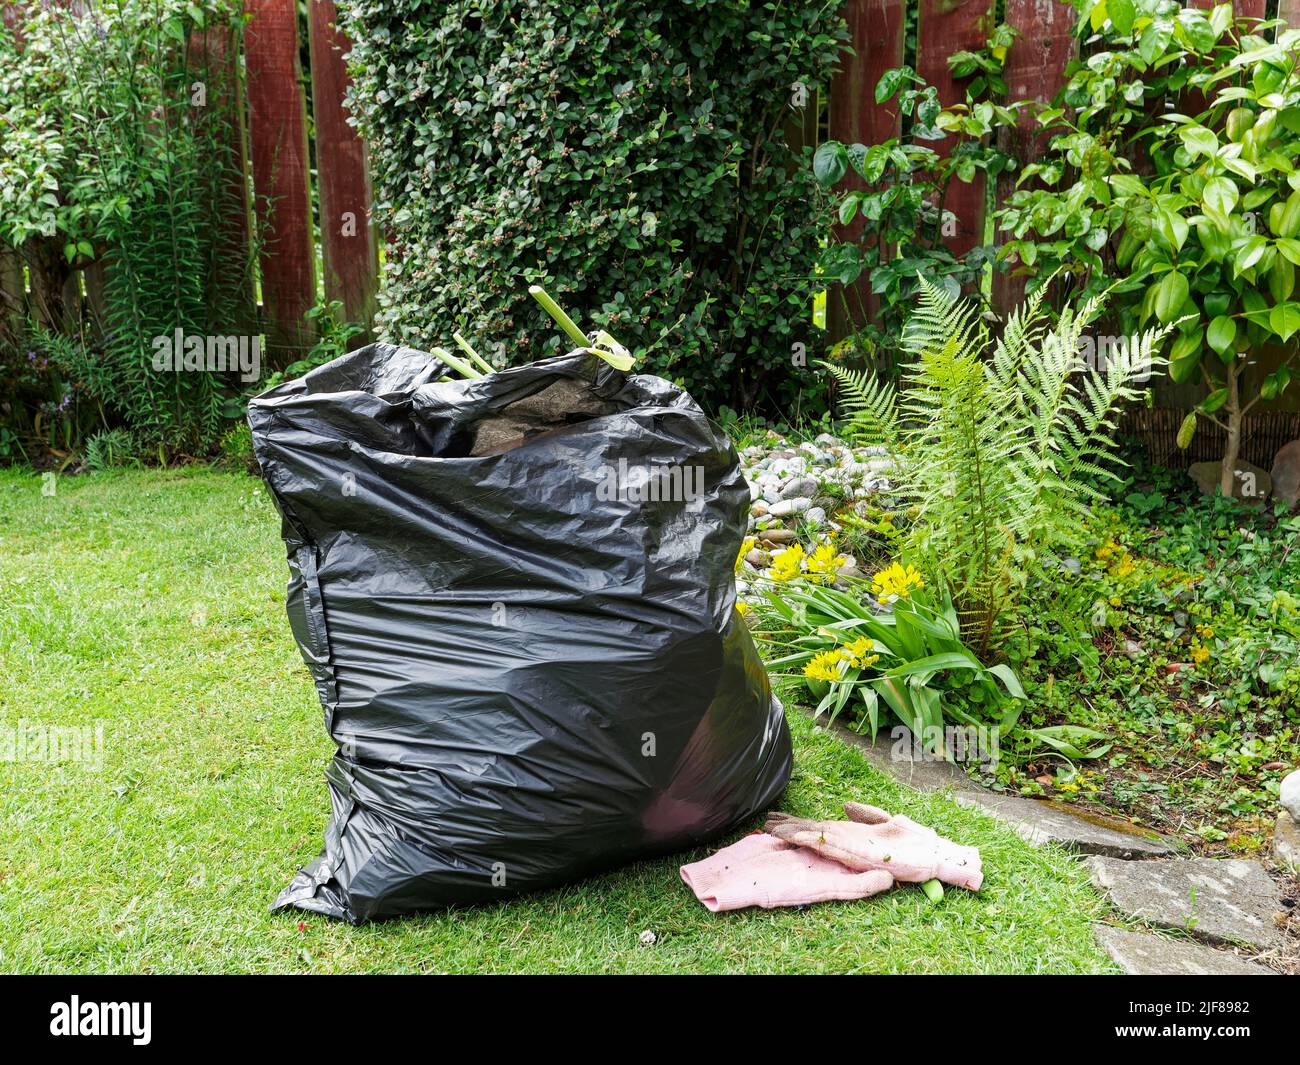 Black plastic bag with gardening waste and gloves in UK garden Stock Photo